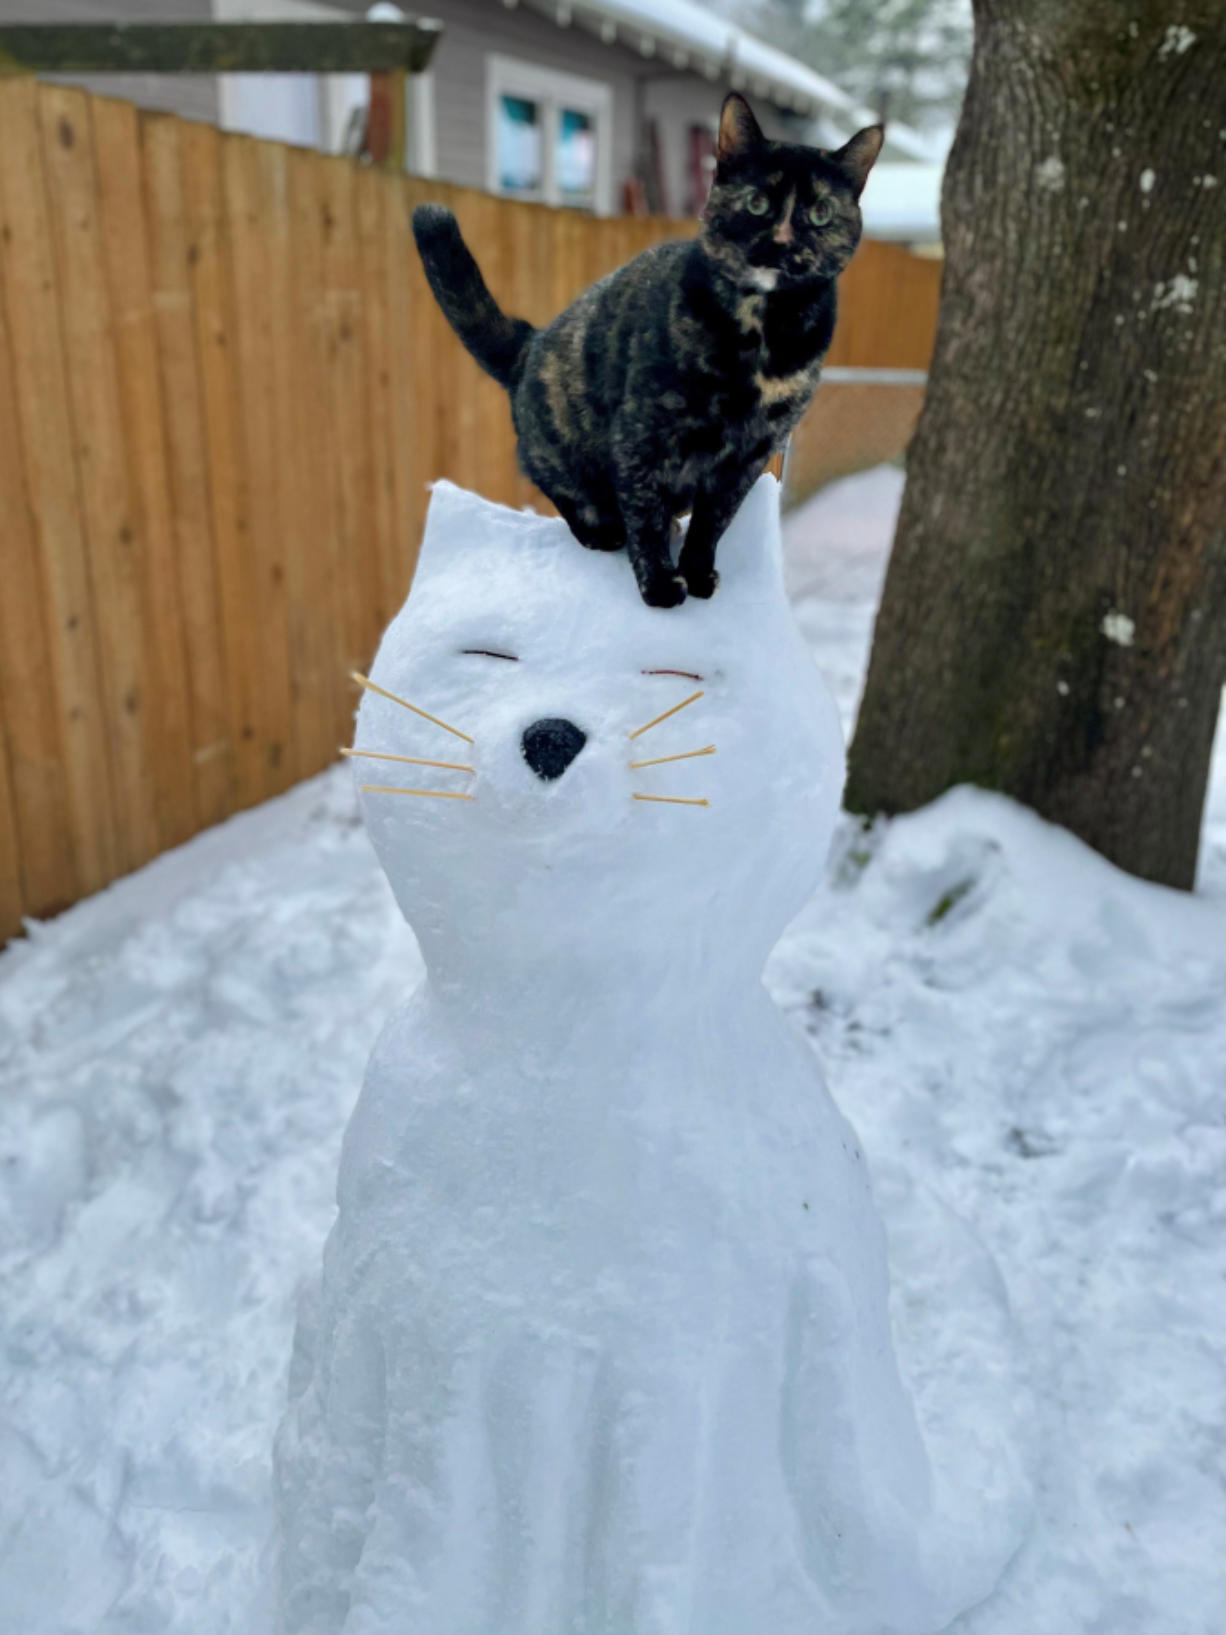 Live cats pose with neighborhood snow cat - The Columbian